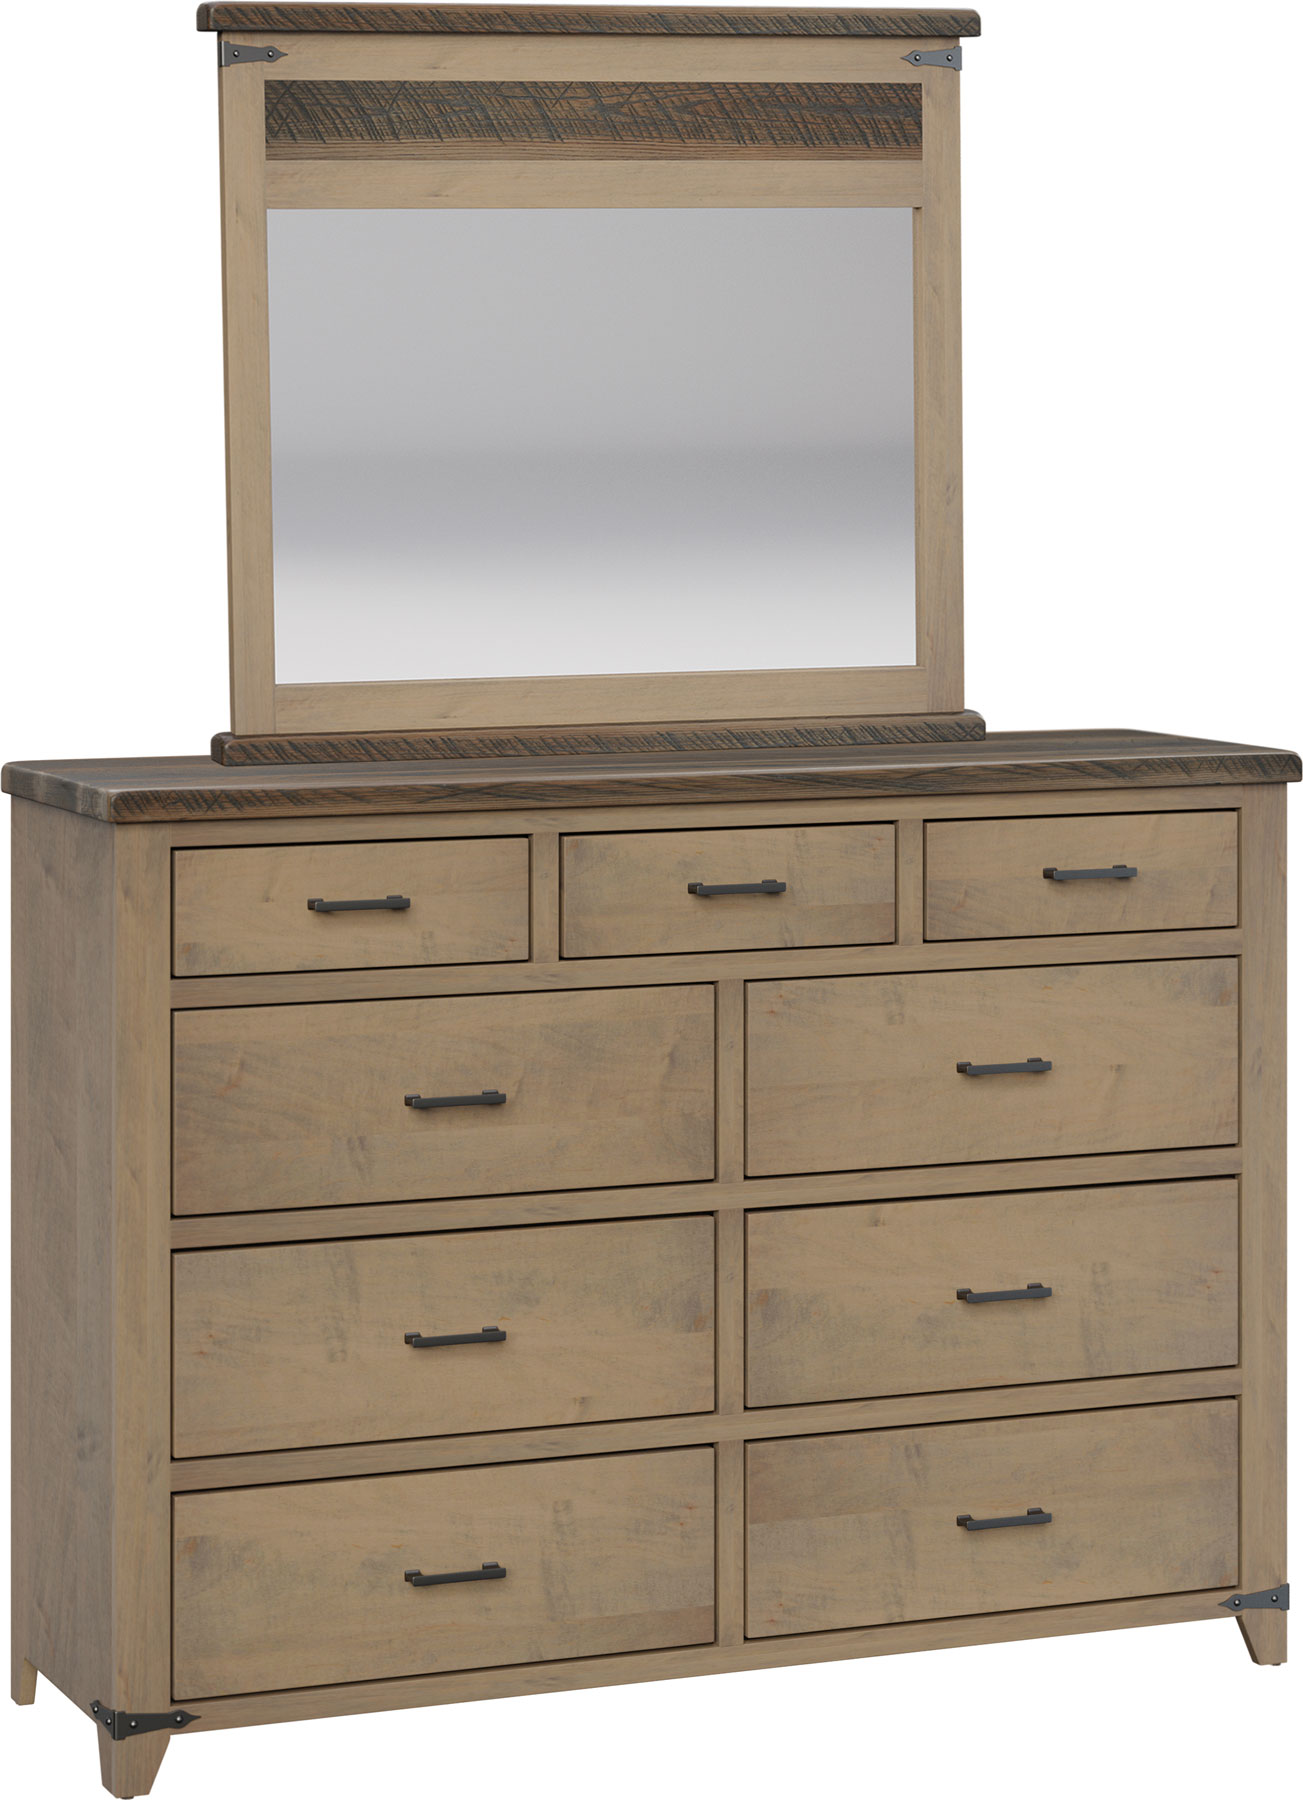 Settlers High Dresser and Mirror